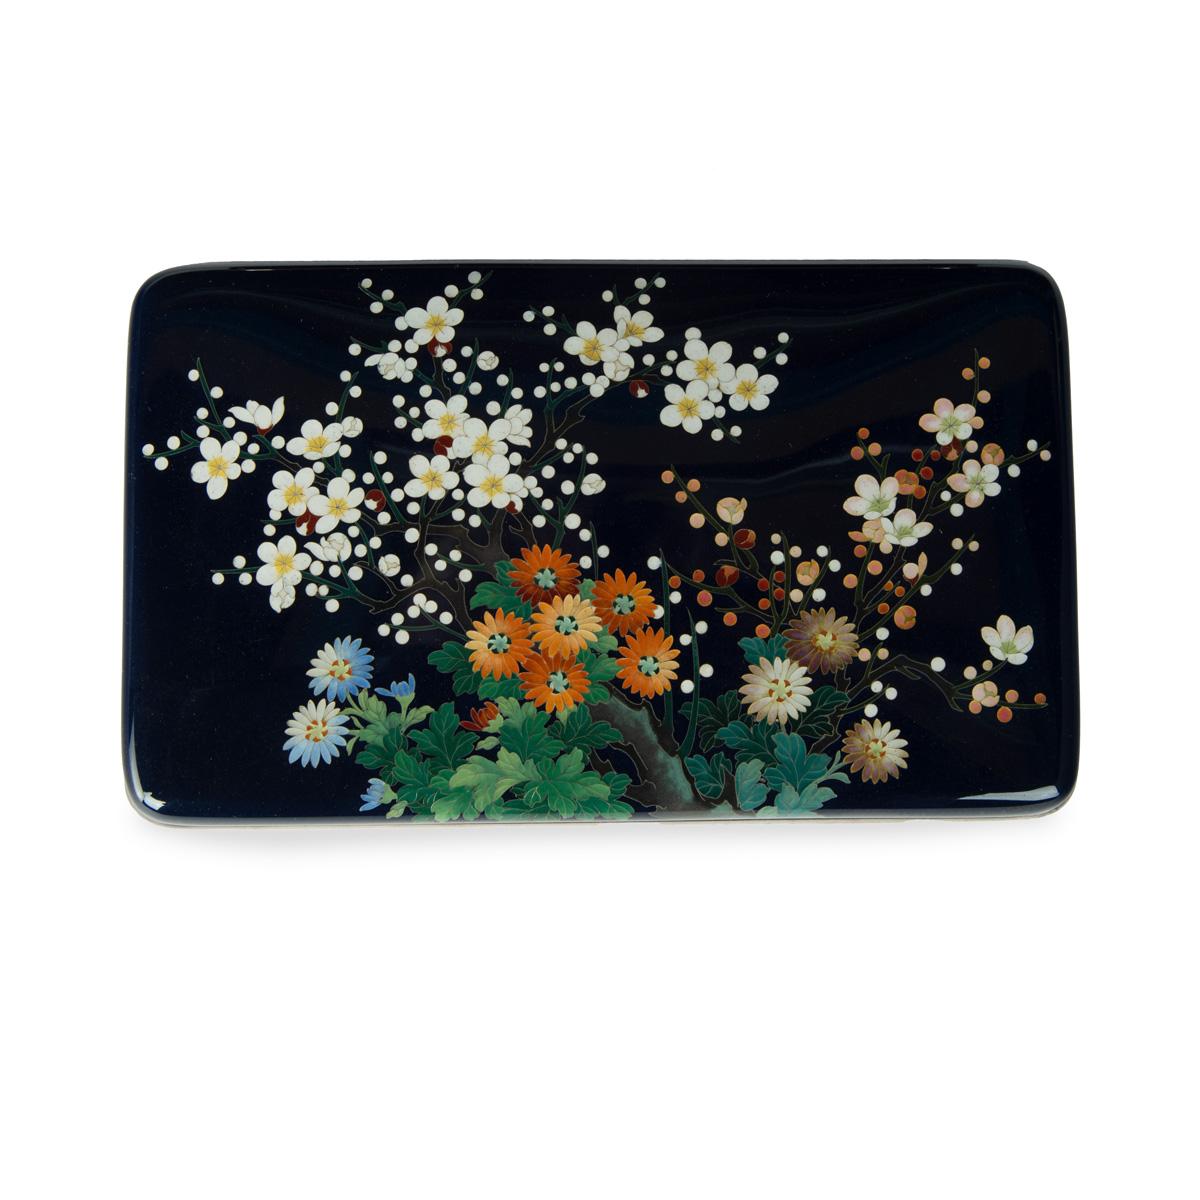 A Meiji period cloisonné box and cover, Ando Company, worked in silver wire and coloured enamels with an array of brightly coloured flowers, reserved against a rich midnight-blue ground, with silver rims and a silk lining, inlaid Ando mark. 